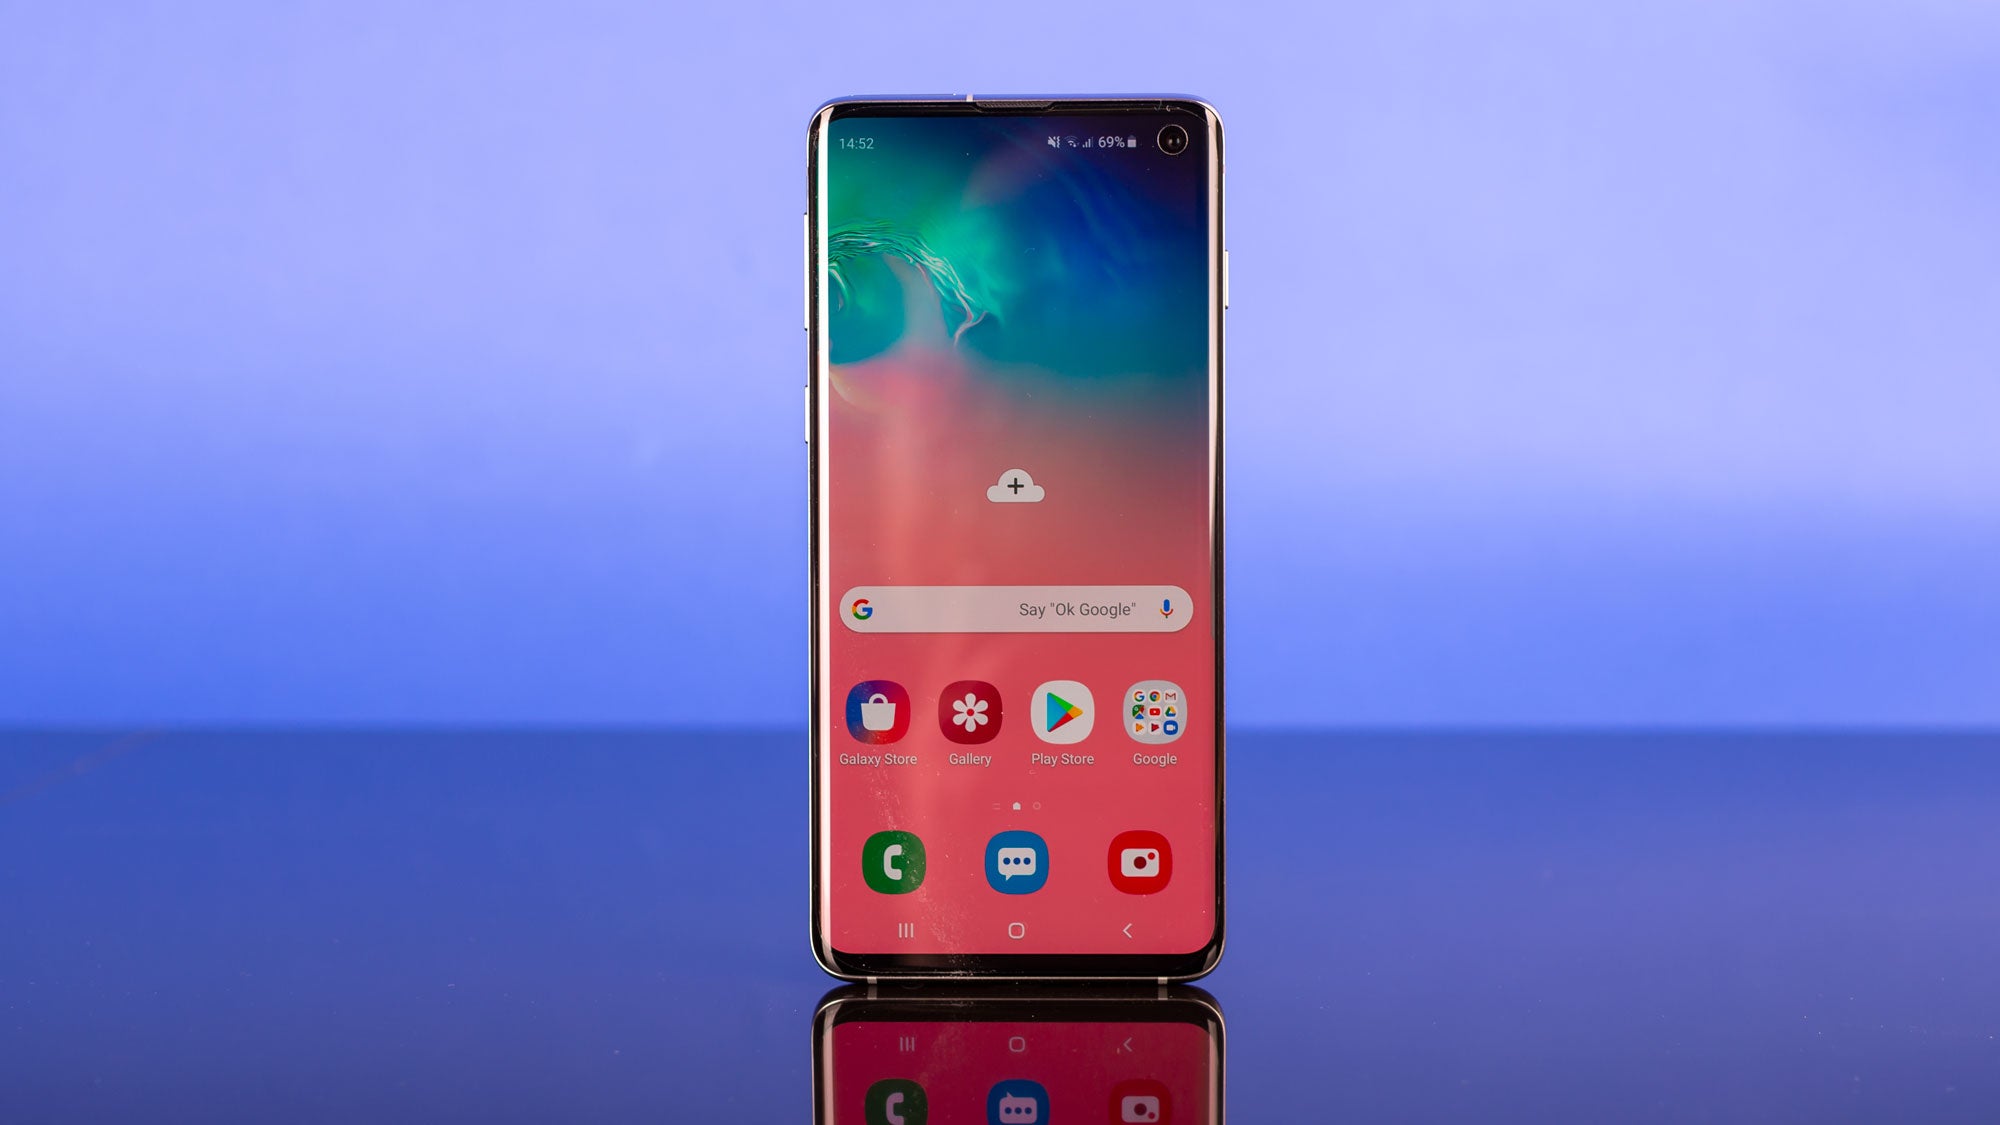 Samsung Galaxy S10 review: Forget foldability, this is Samsung's biggest leap forward yet | Expert Reviews